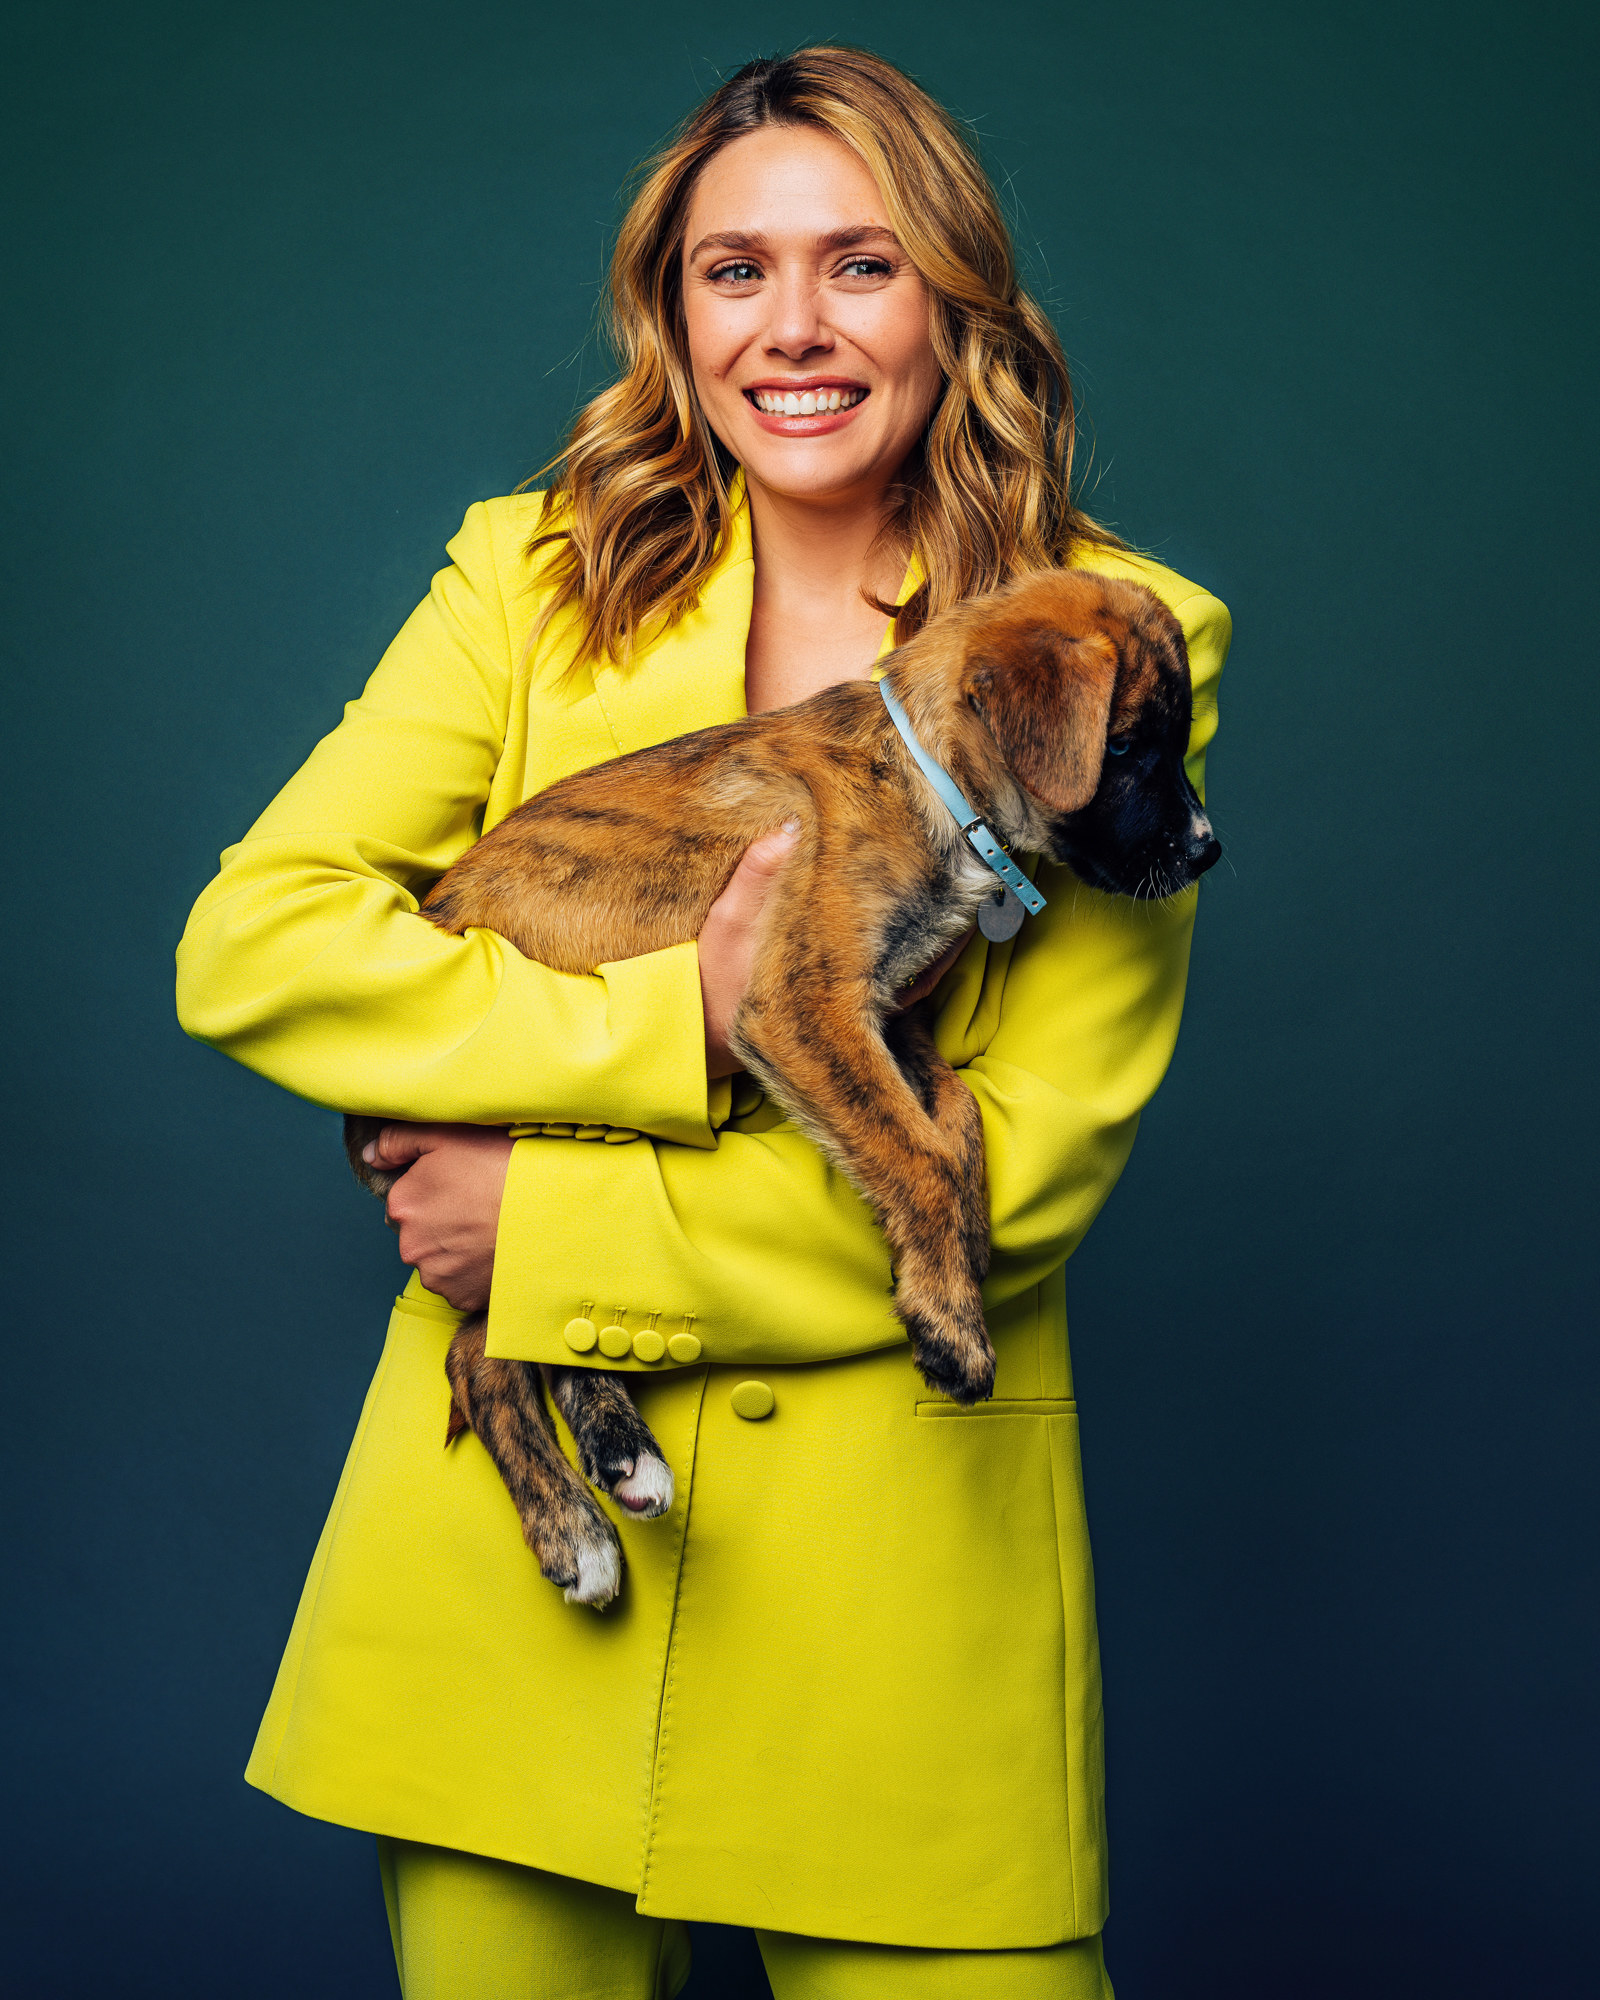 Elizabeth in a yellow suit, laughing, and holding a puppy